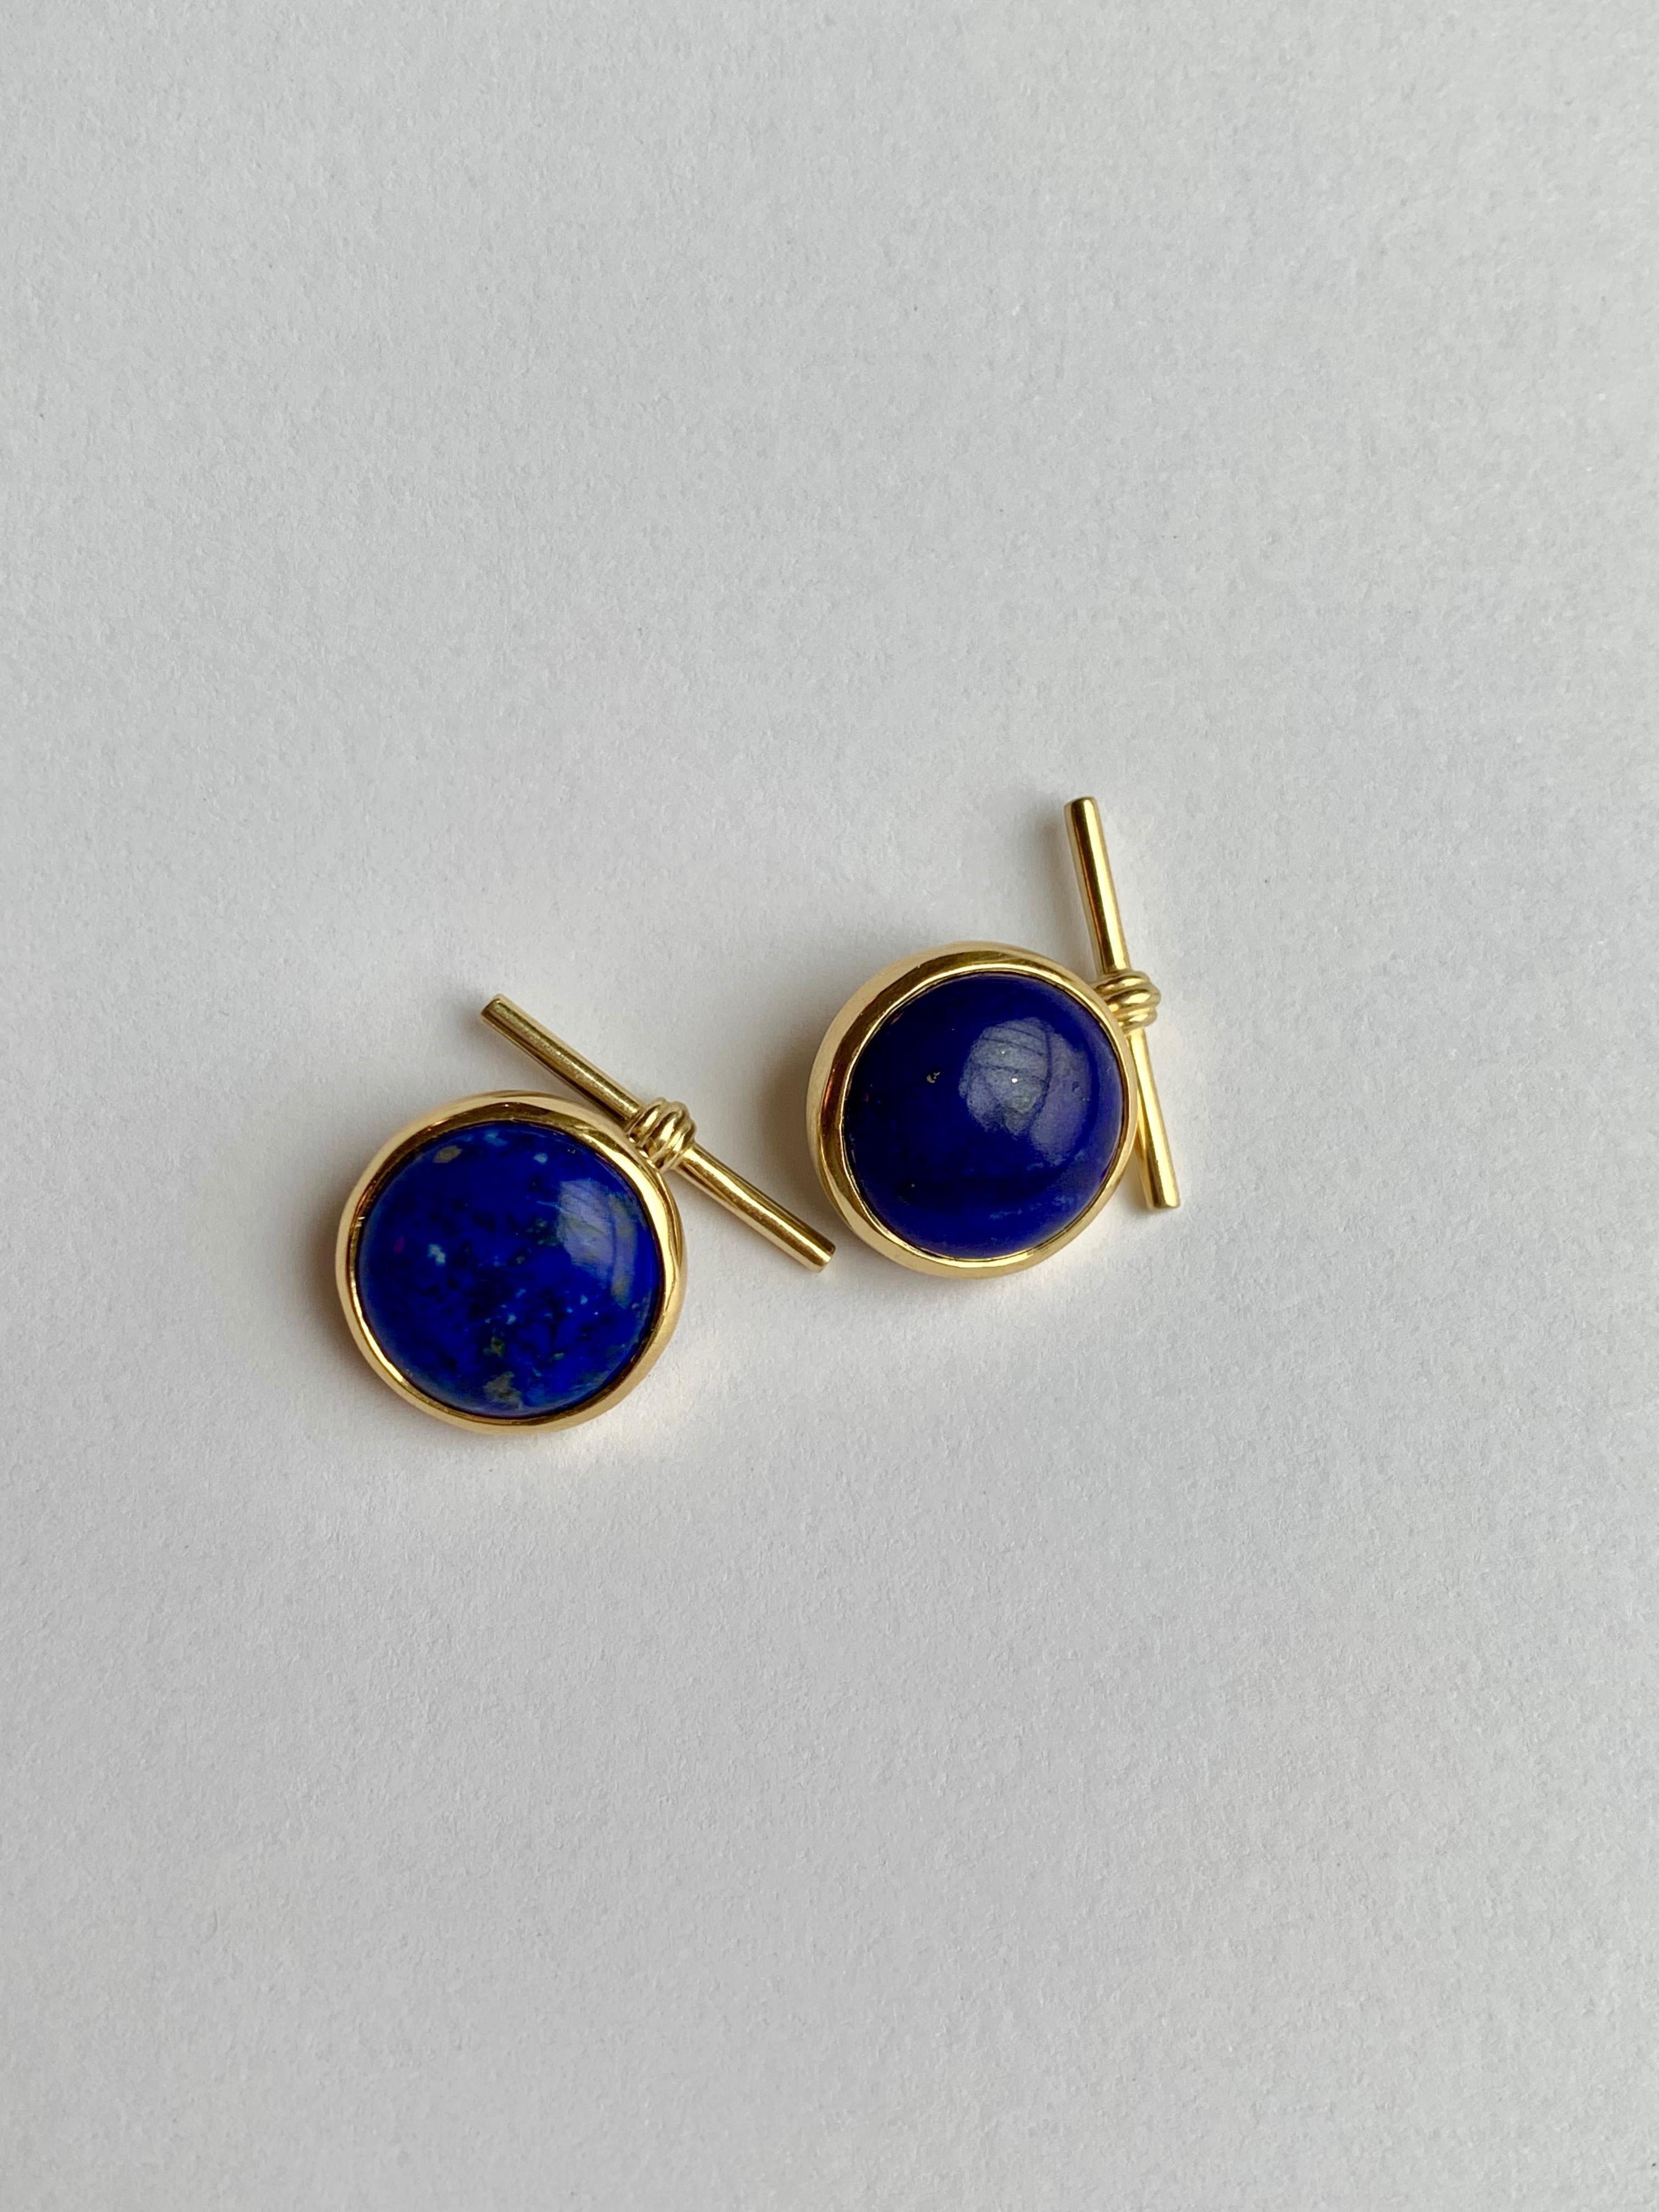 The striking blue shade of Lapis Lazuli with natural inclusions is set off nicely with yellow gold mounting. These round cabochon cut cufflinks set in 18 karat yellow gold with chain and gold T bar are modern and sophisticated. 

- 18 karat yellow